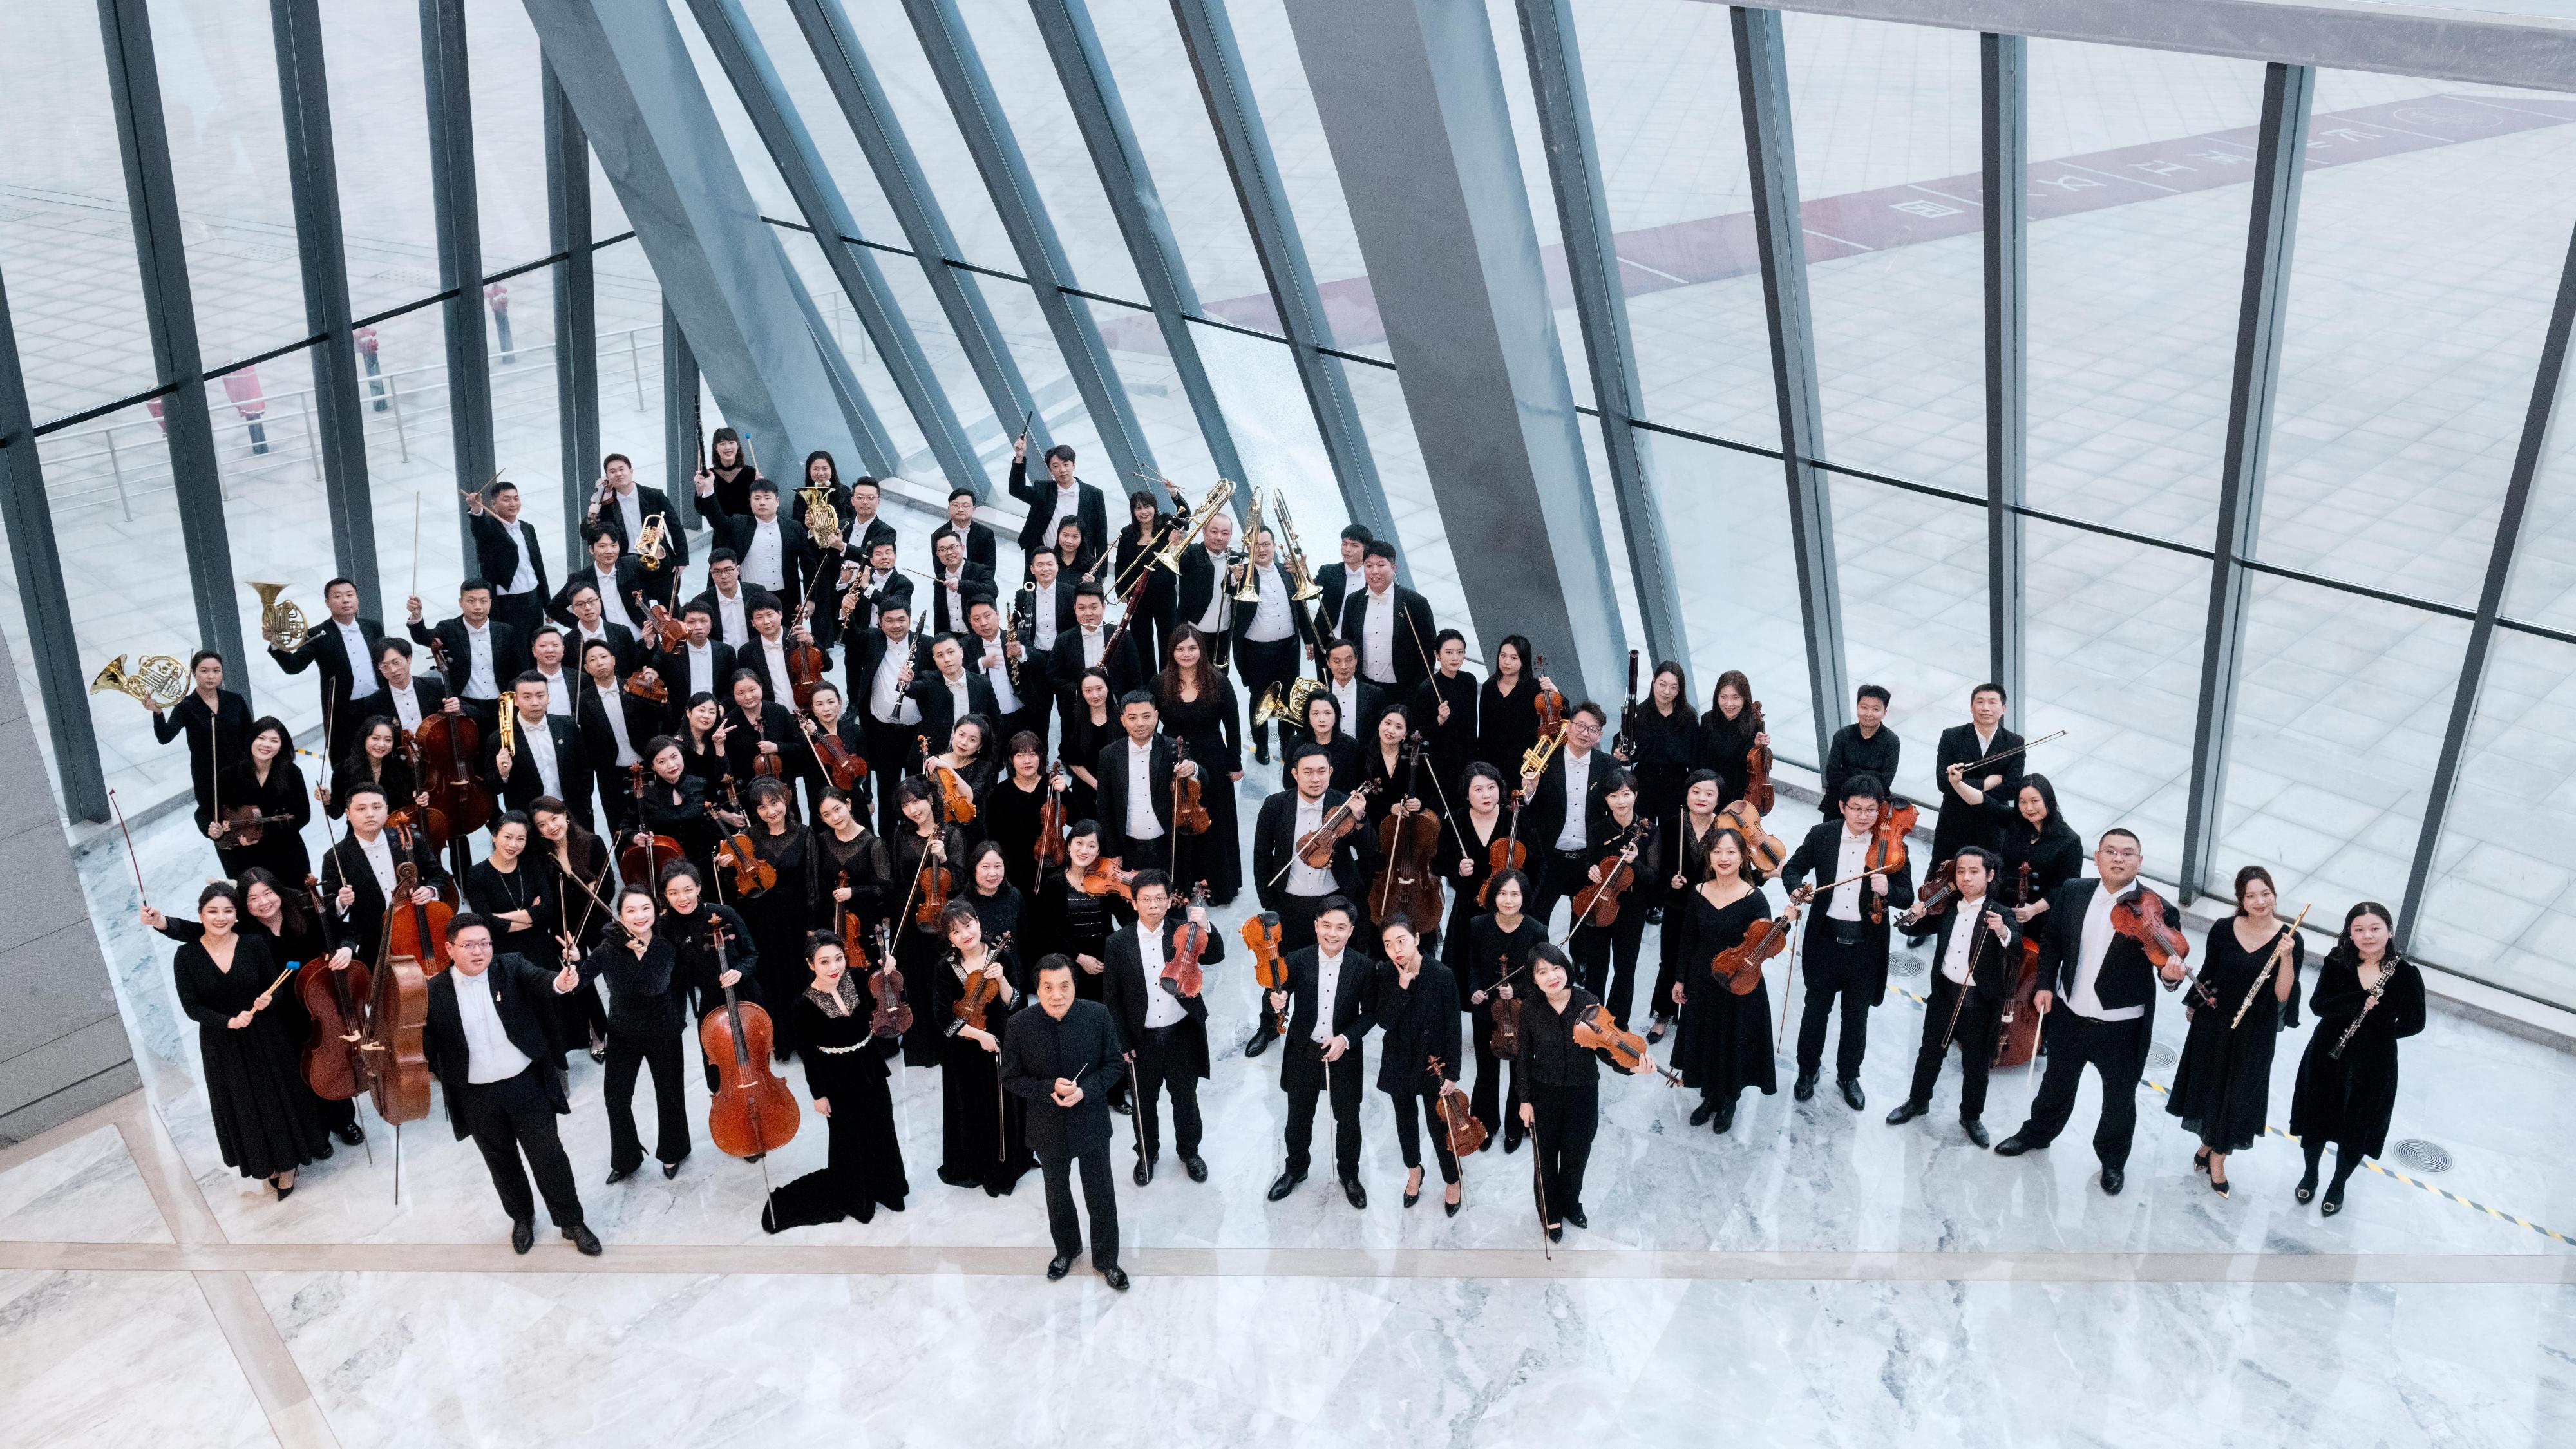 The Leisure and Cultural Services Department's "Tan Dun WE-Festival" will feature "Tan Dun: BACH Rock & Hanggai - When BACH meets GENGHIS KHAN" as the finale in December. Photo shows Changsha Symphony Orchestra.